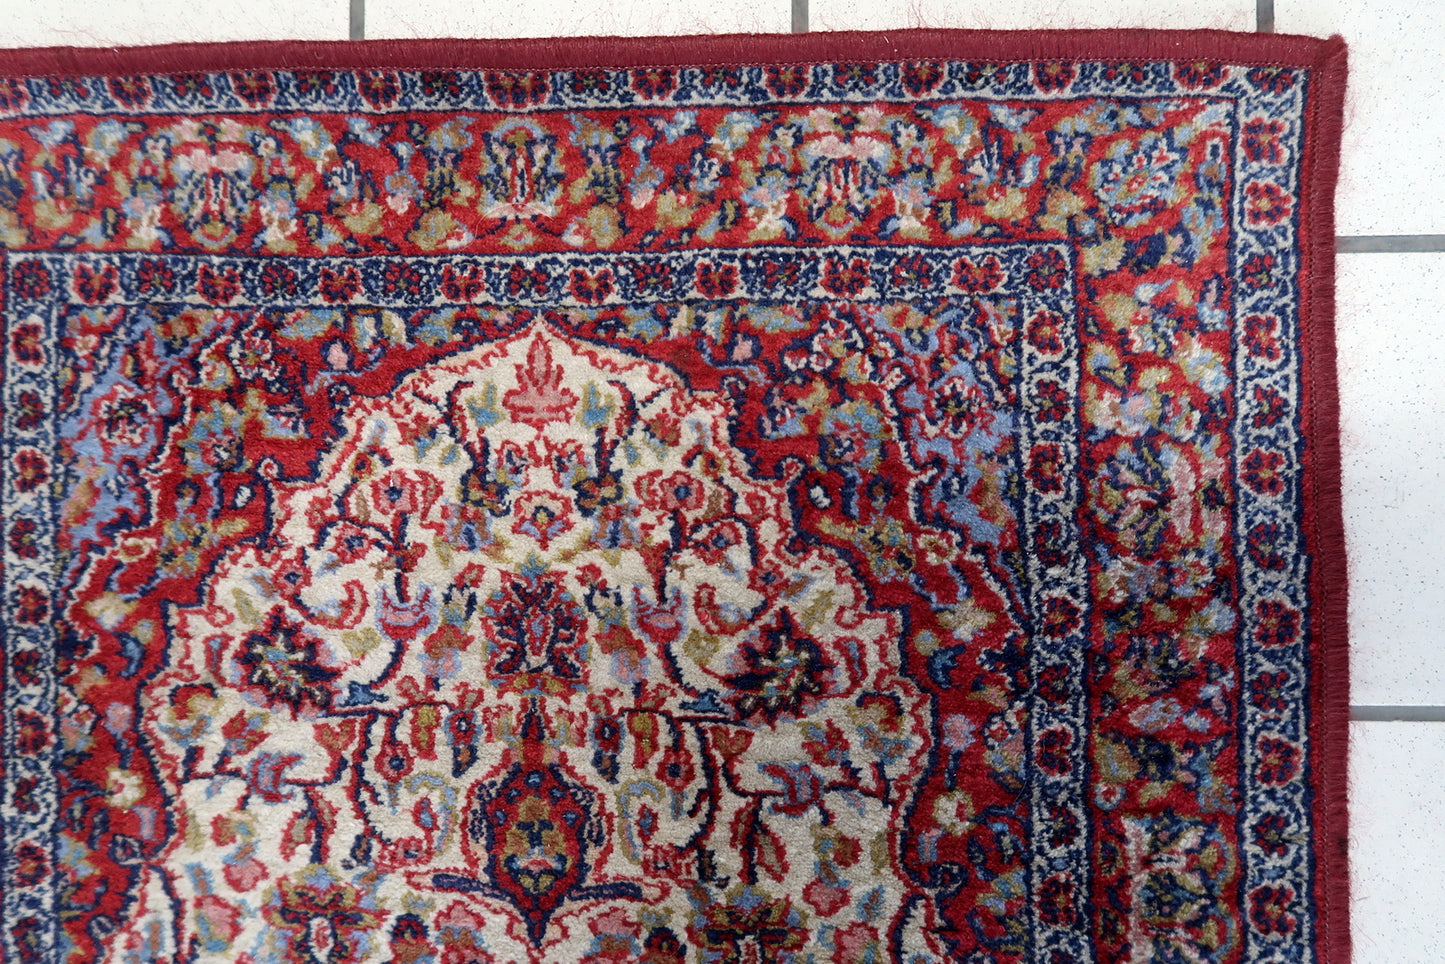 Close-up of the central part of the rug displaying intricate geometric motifs